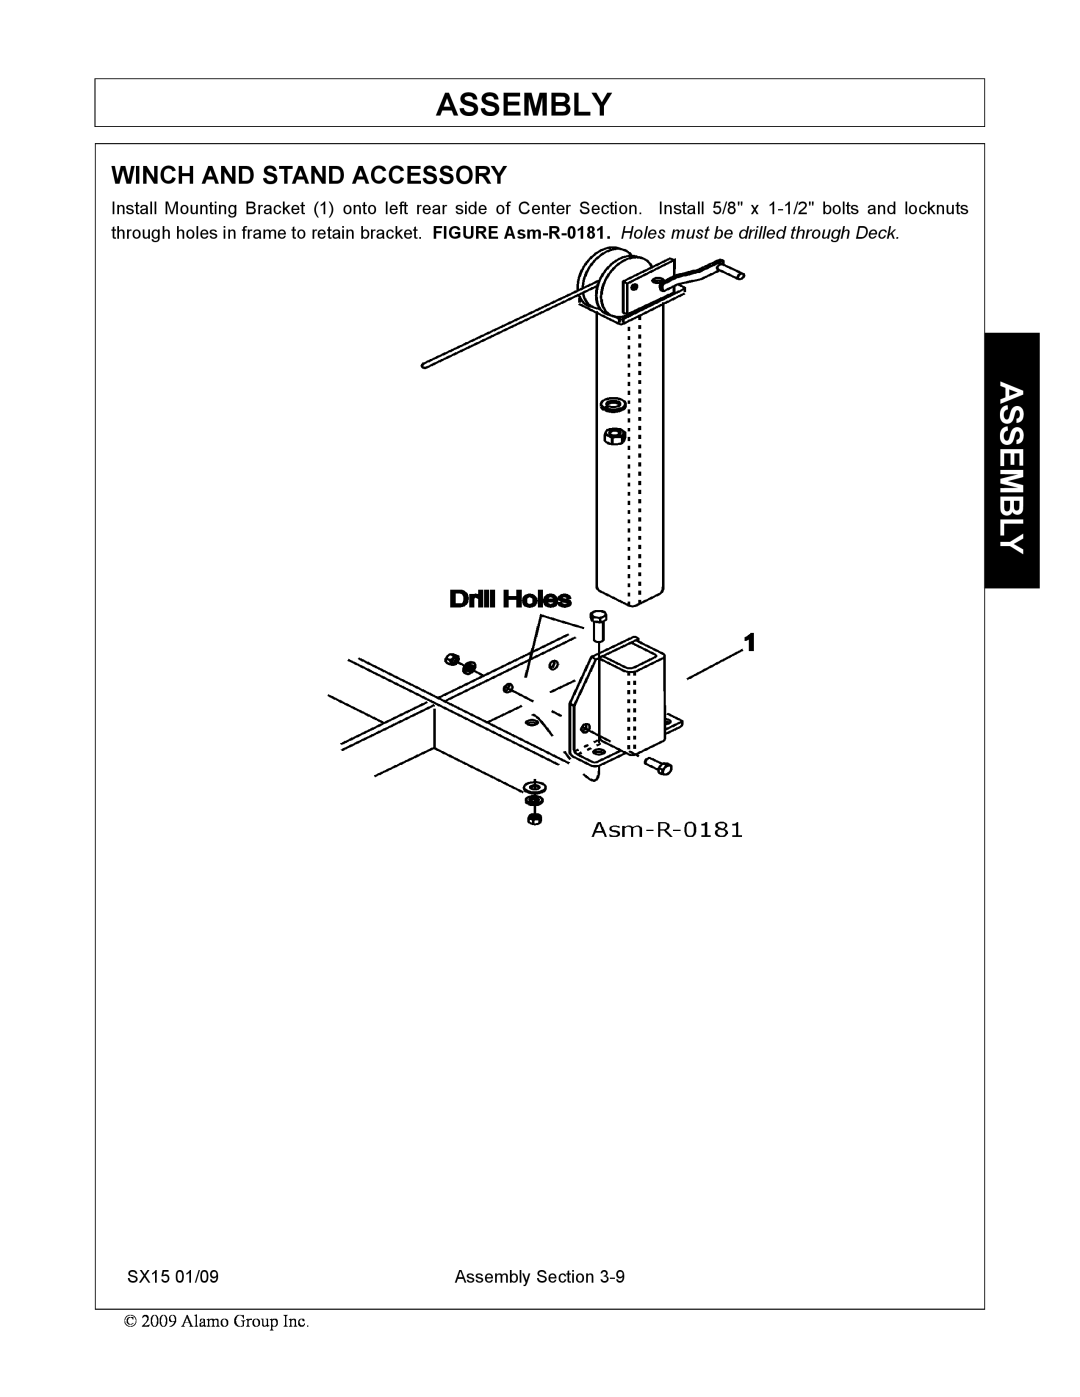 Alamo SX15 manual Winch And Stand Accessory, Assembly 